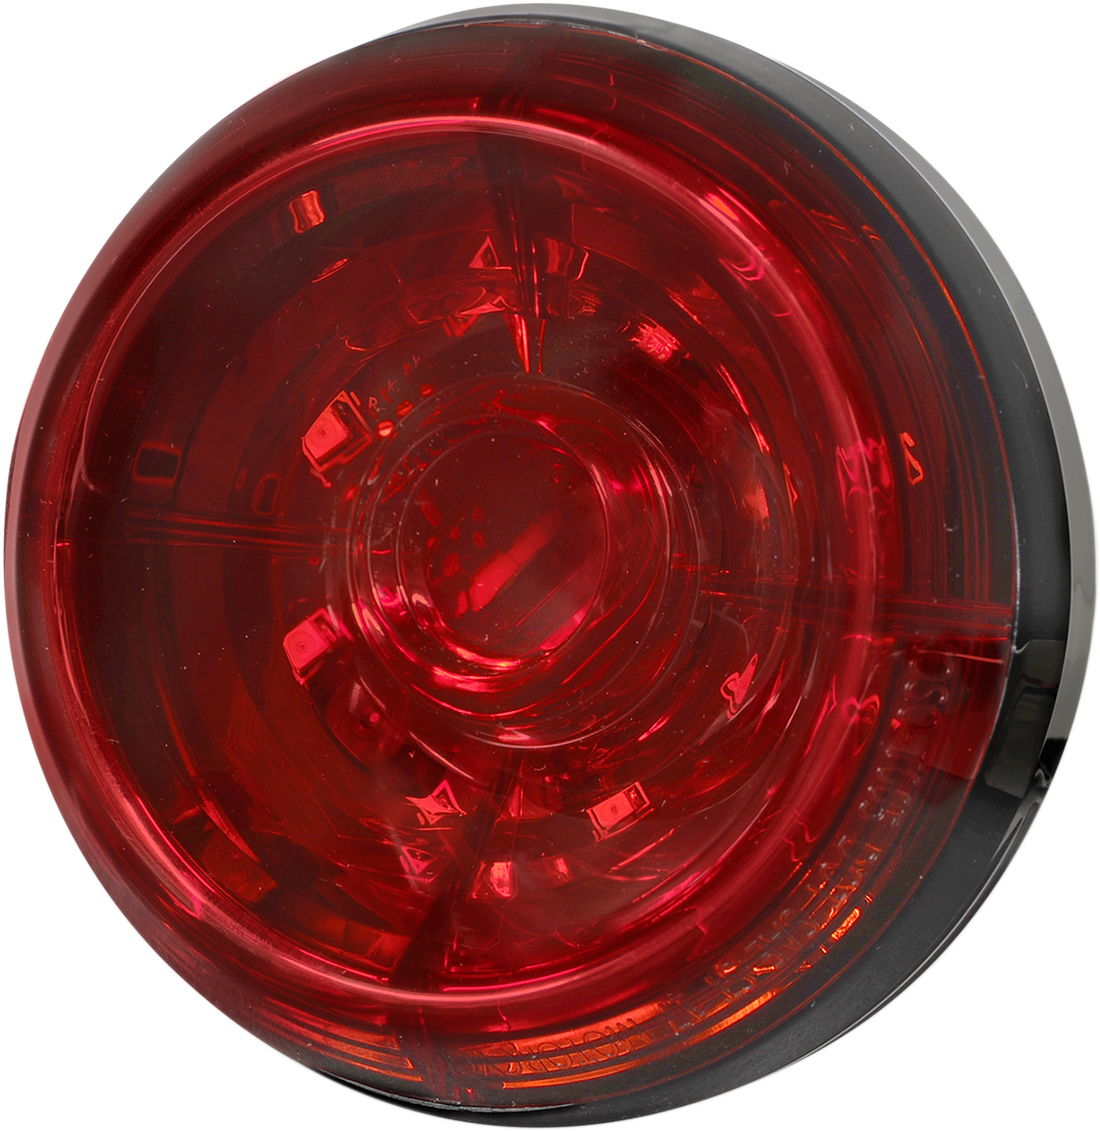 2010-1397 - KOSO NORTH AMERICA LED Taillight - Red Lens HB035020